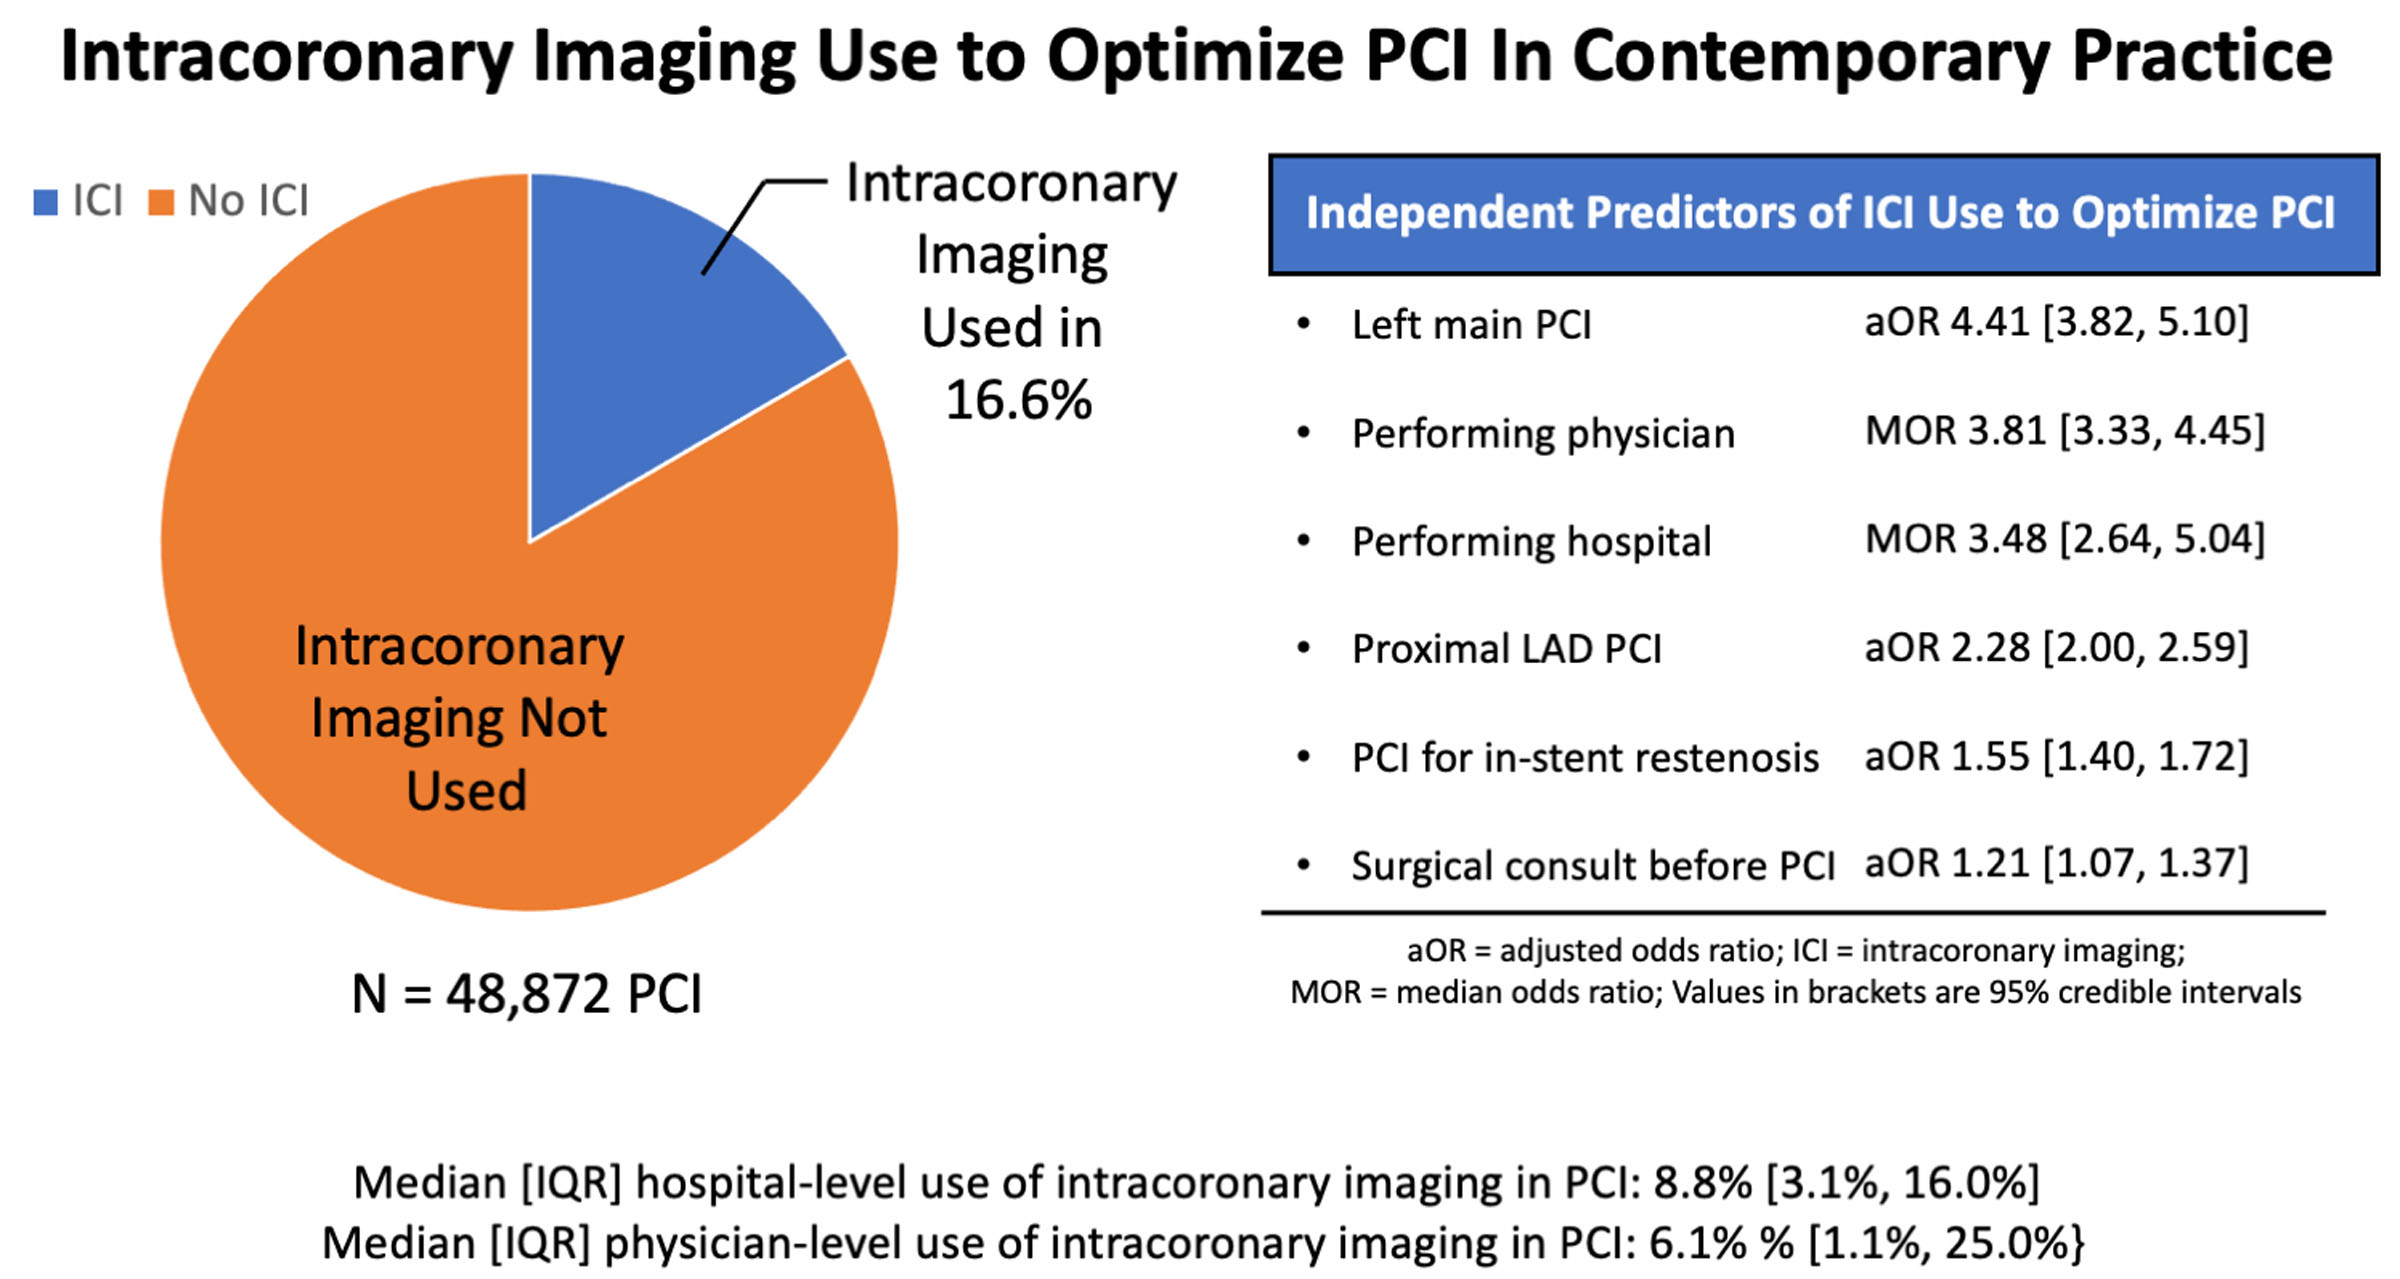 Rates of Intracoronary Imaging Optimization in Contemporary Percutaneous Coronary Intervention: A Report From the BMC2 Registry